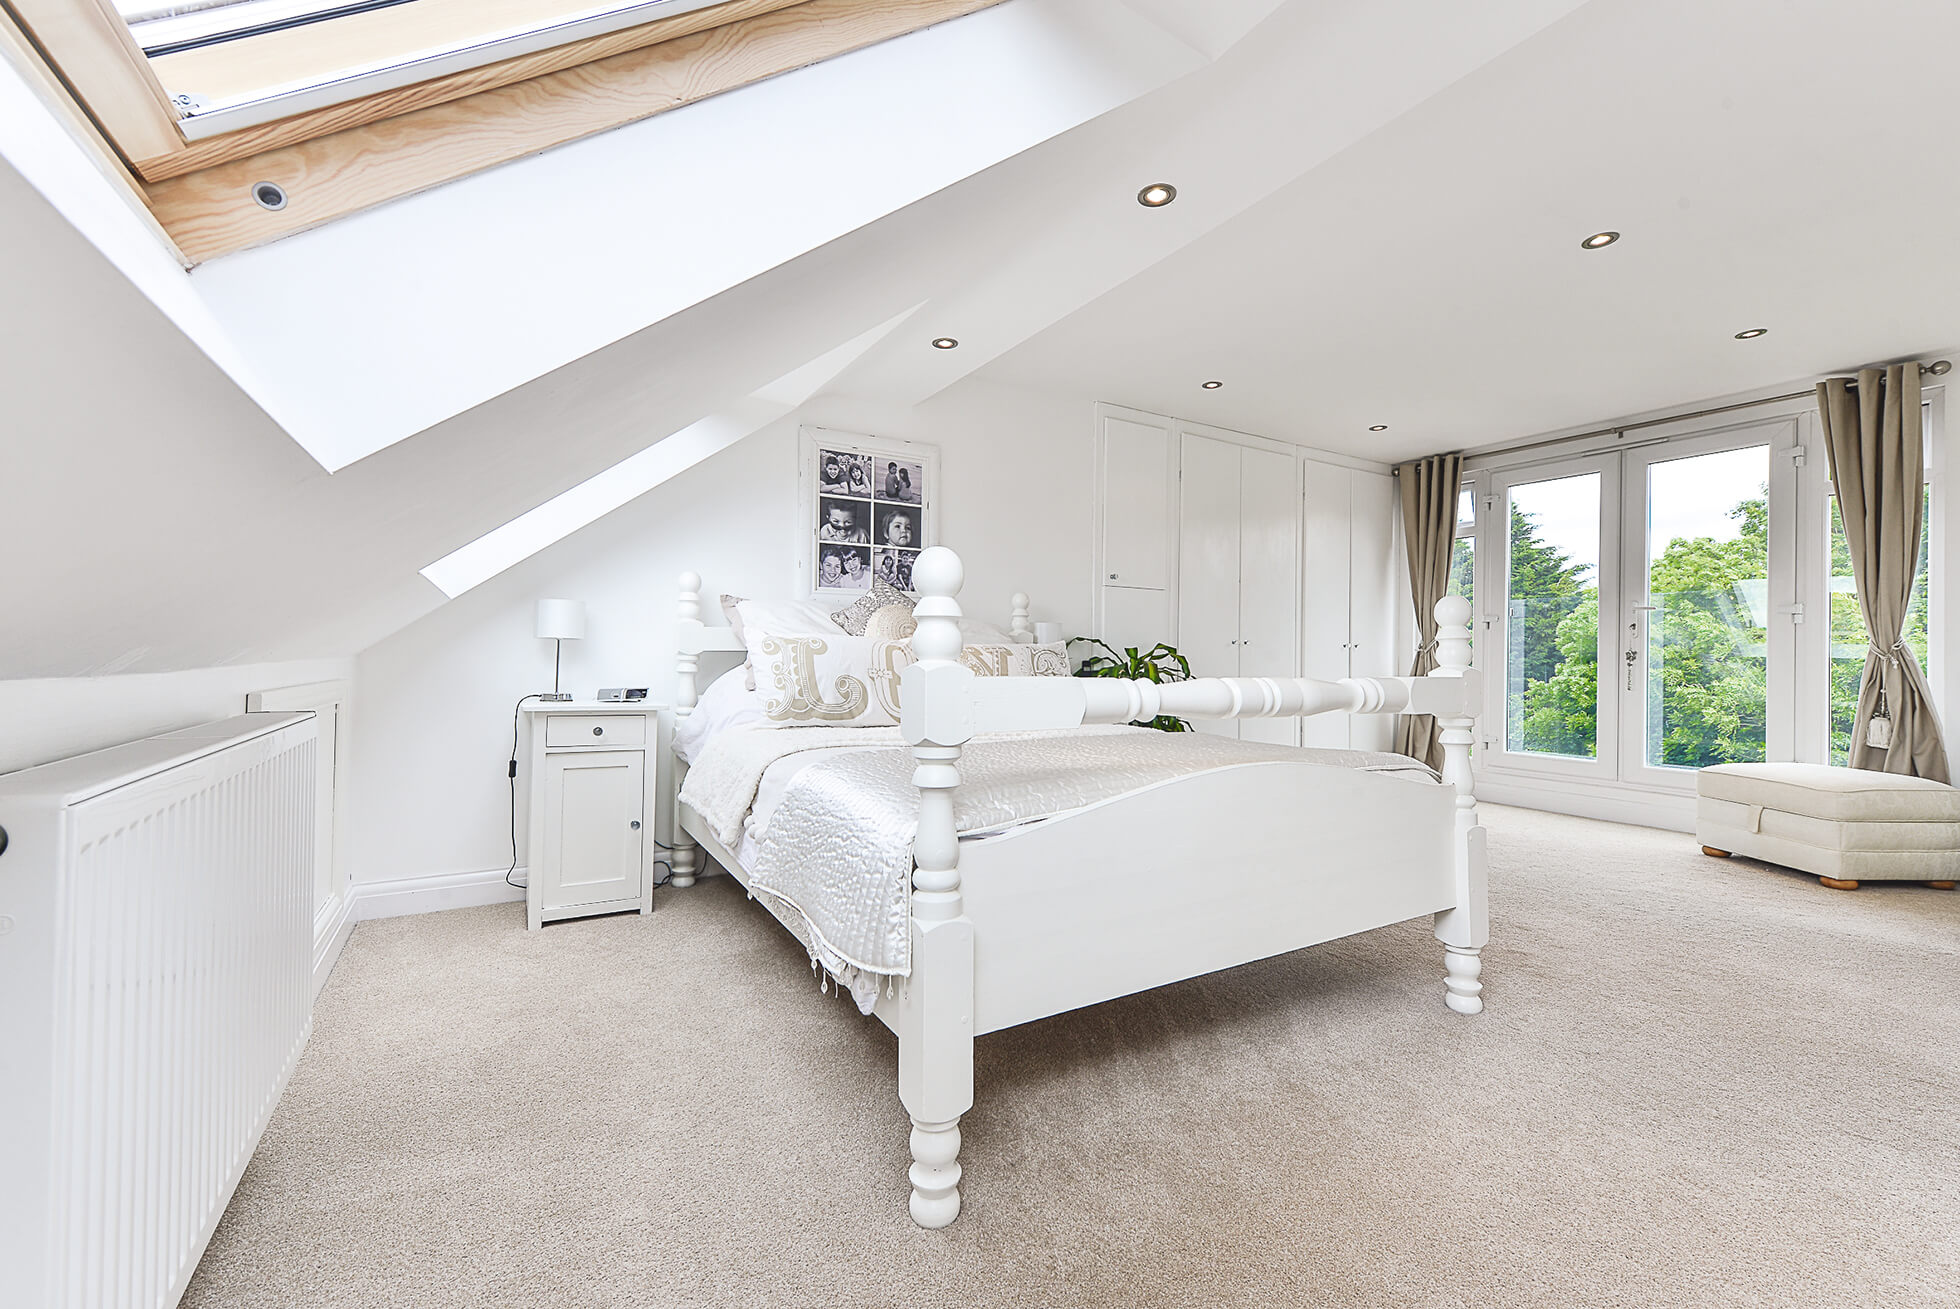 Do you have a question about converting your Loft in Gadebridge? Here are the most popular questions asked by our clients.